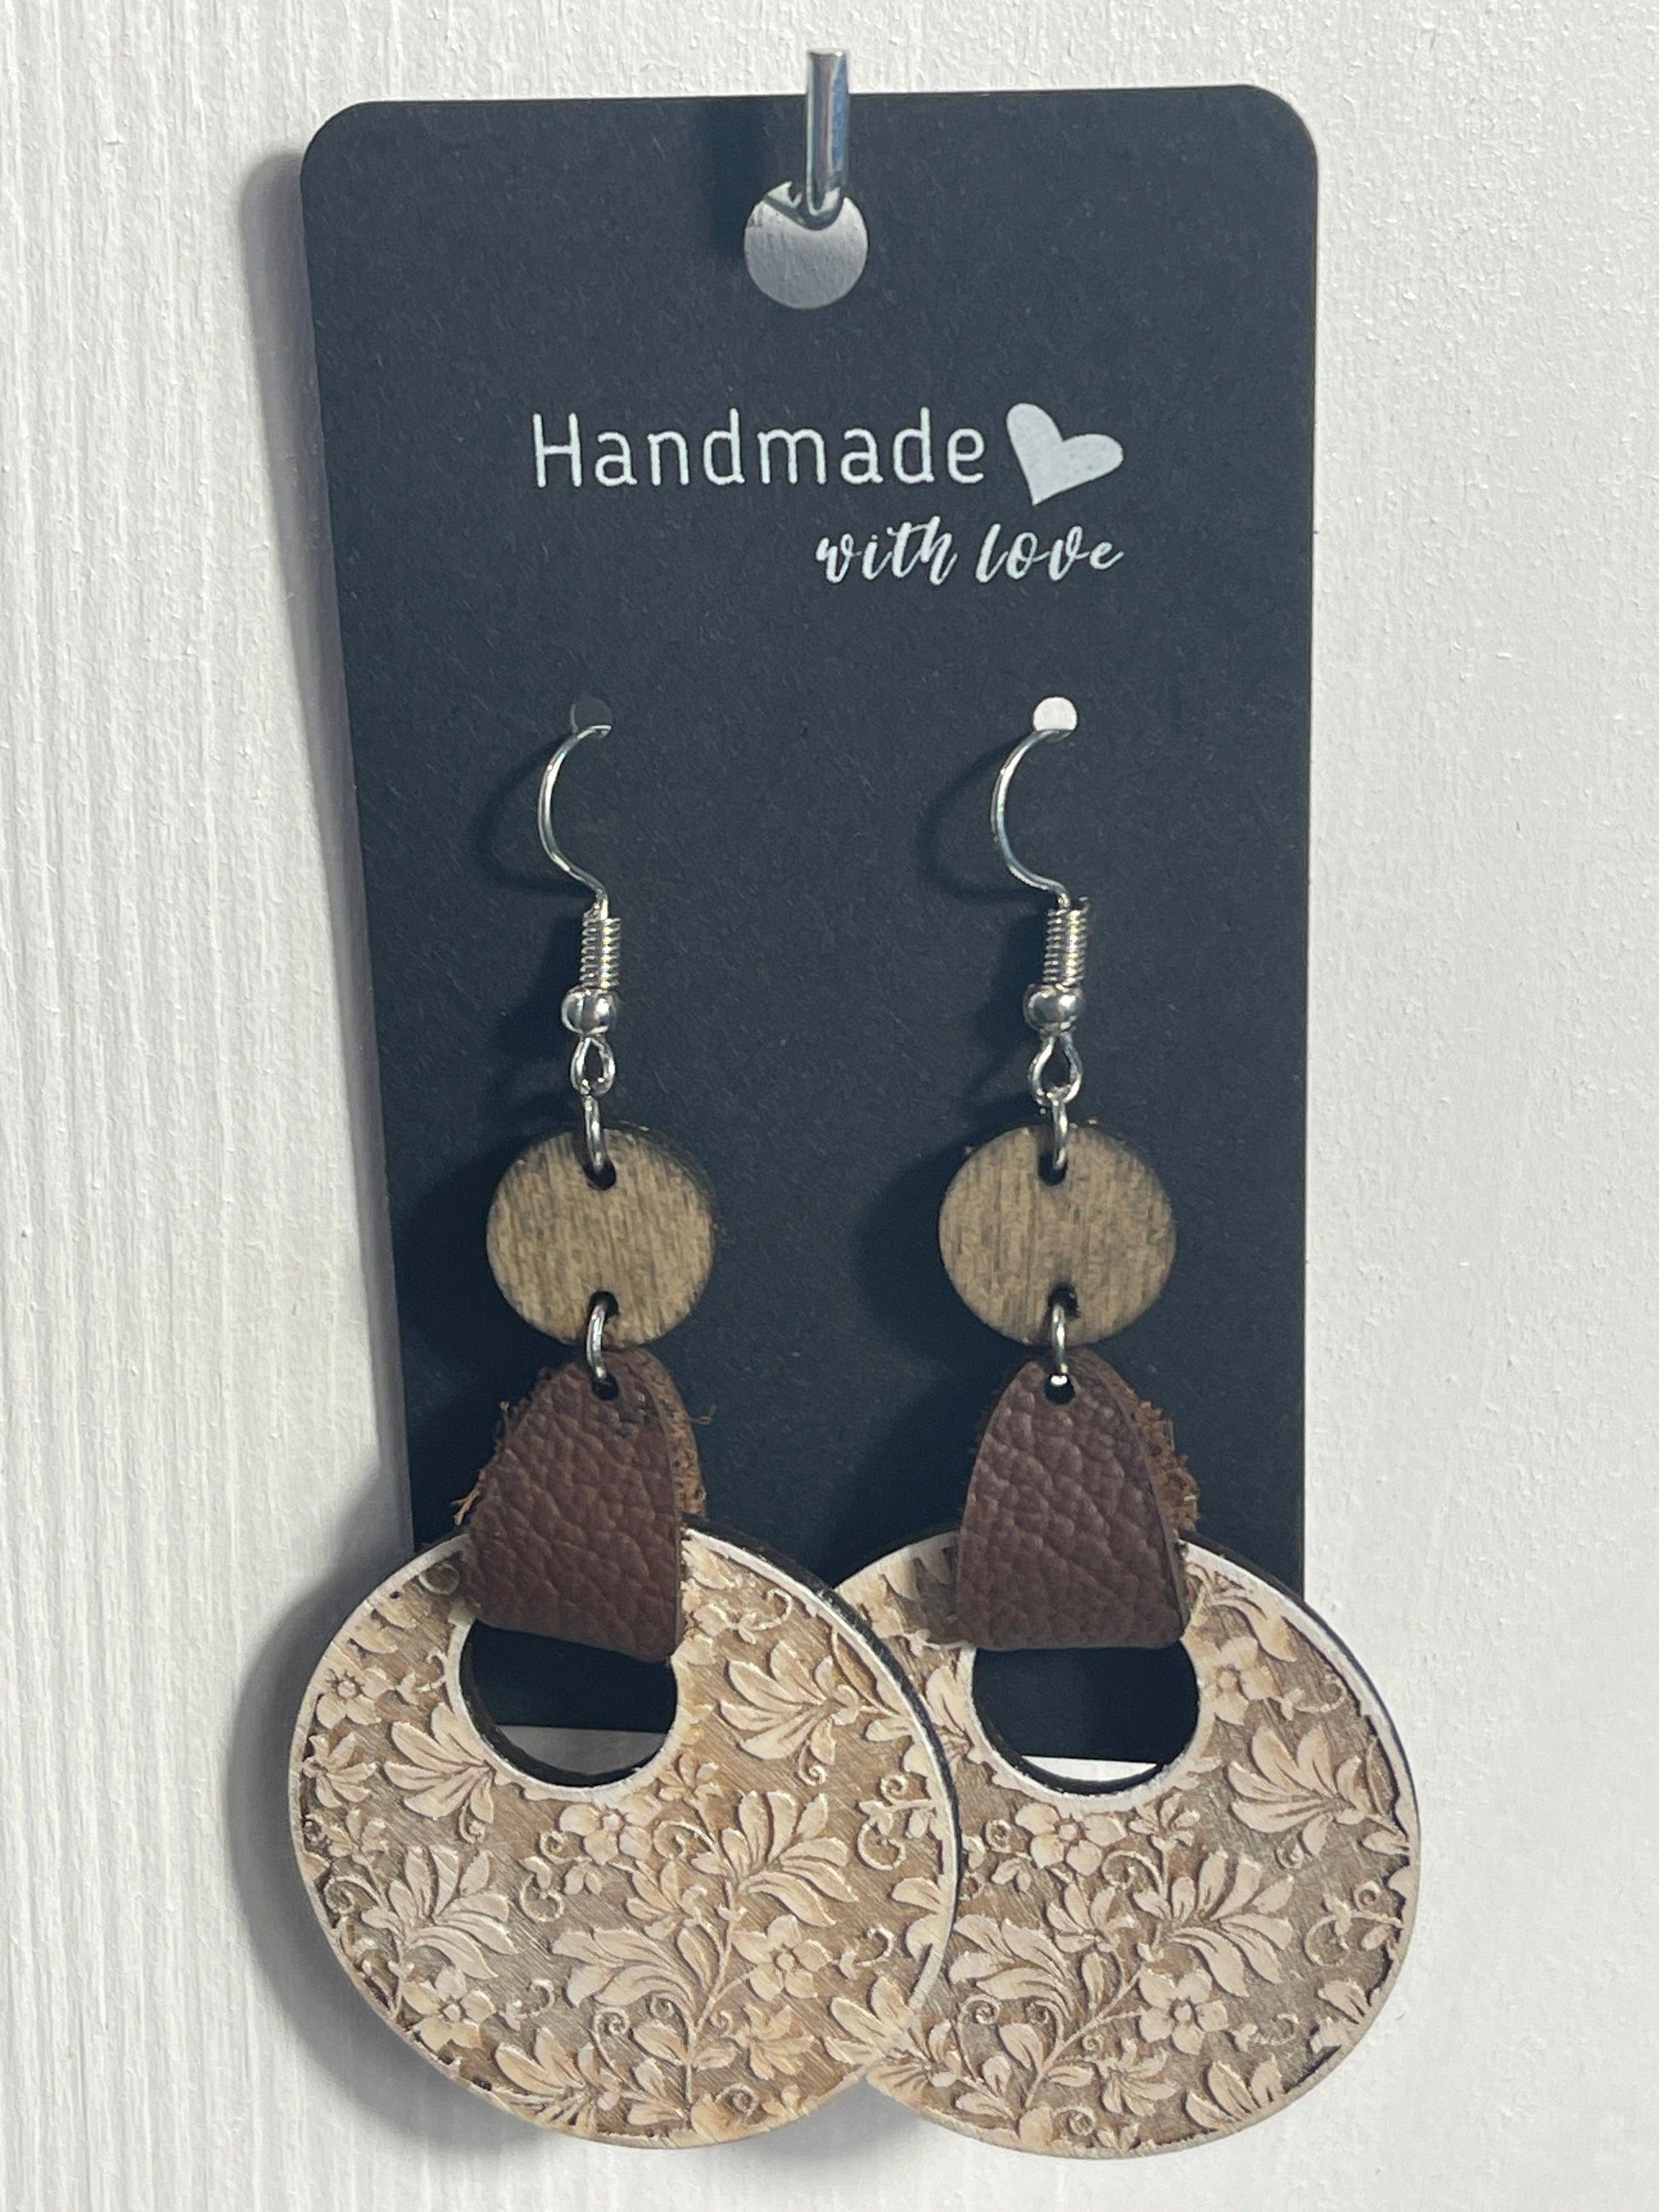 Reverse etched round wood earrings - Live Loud Creations